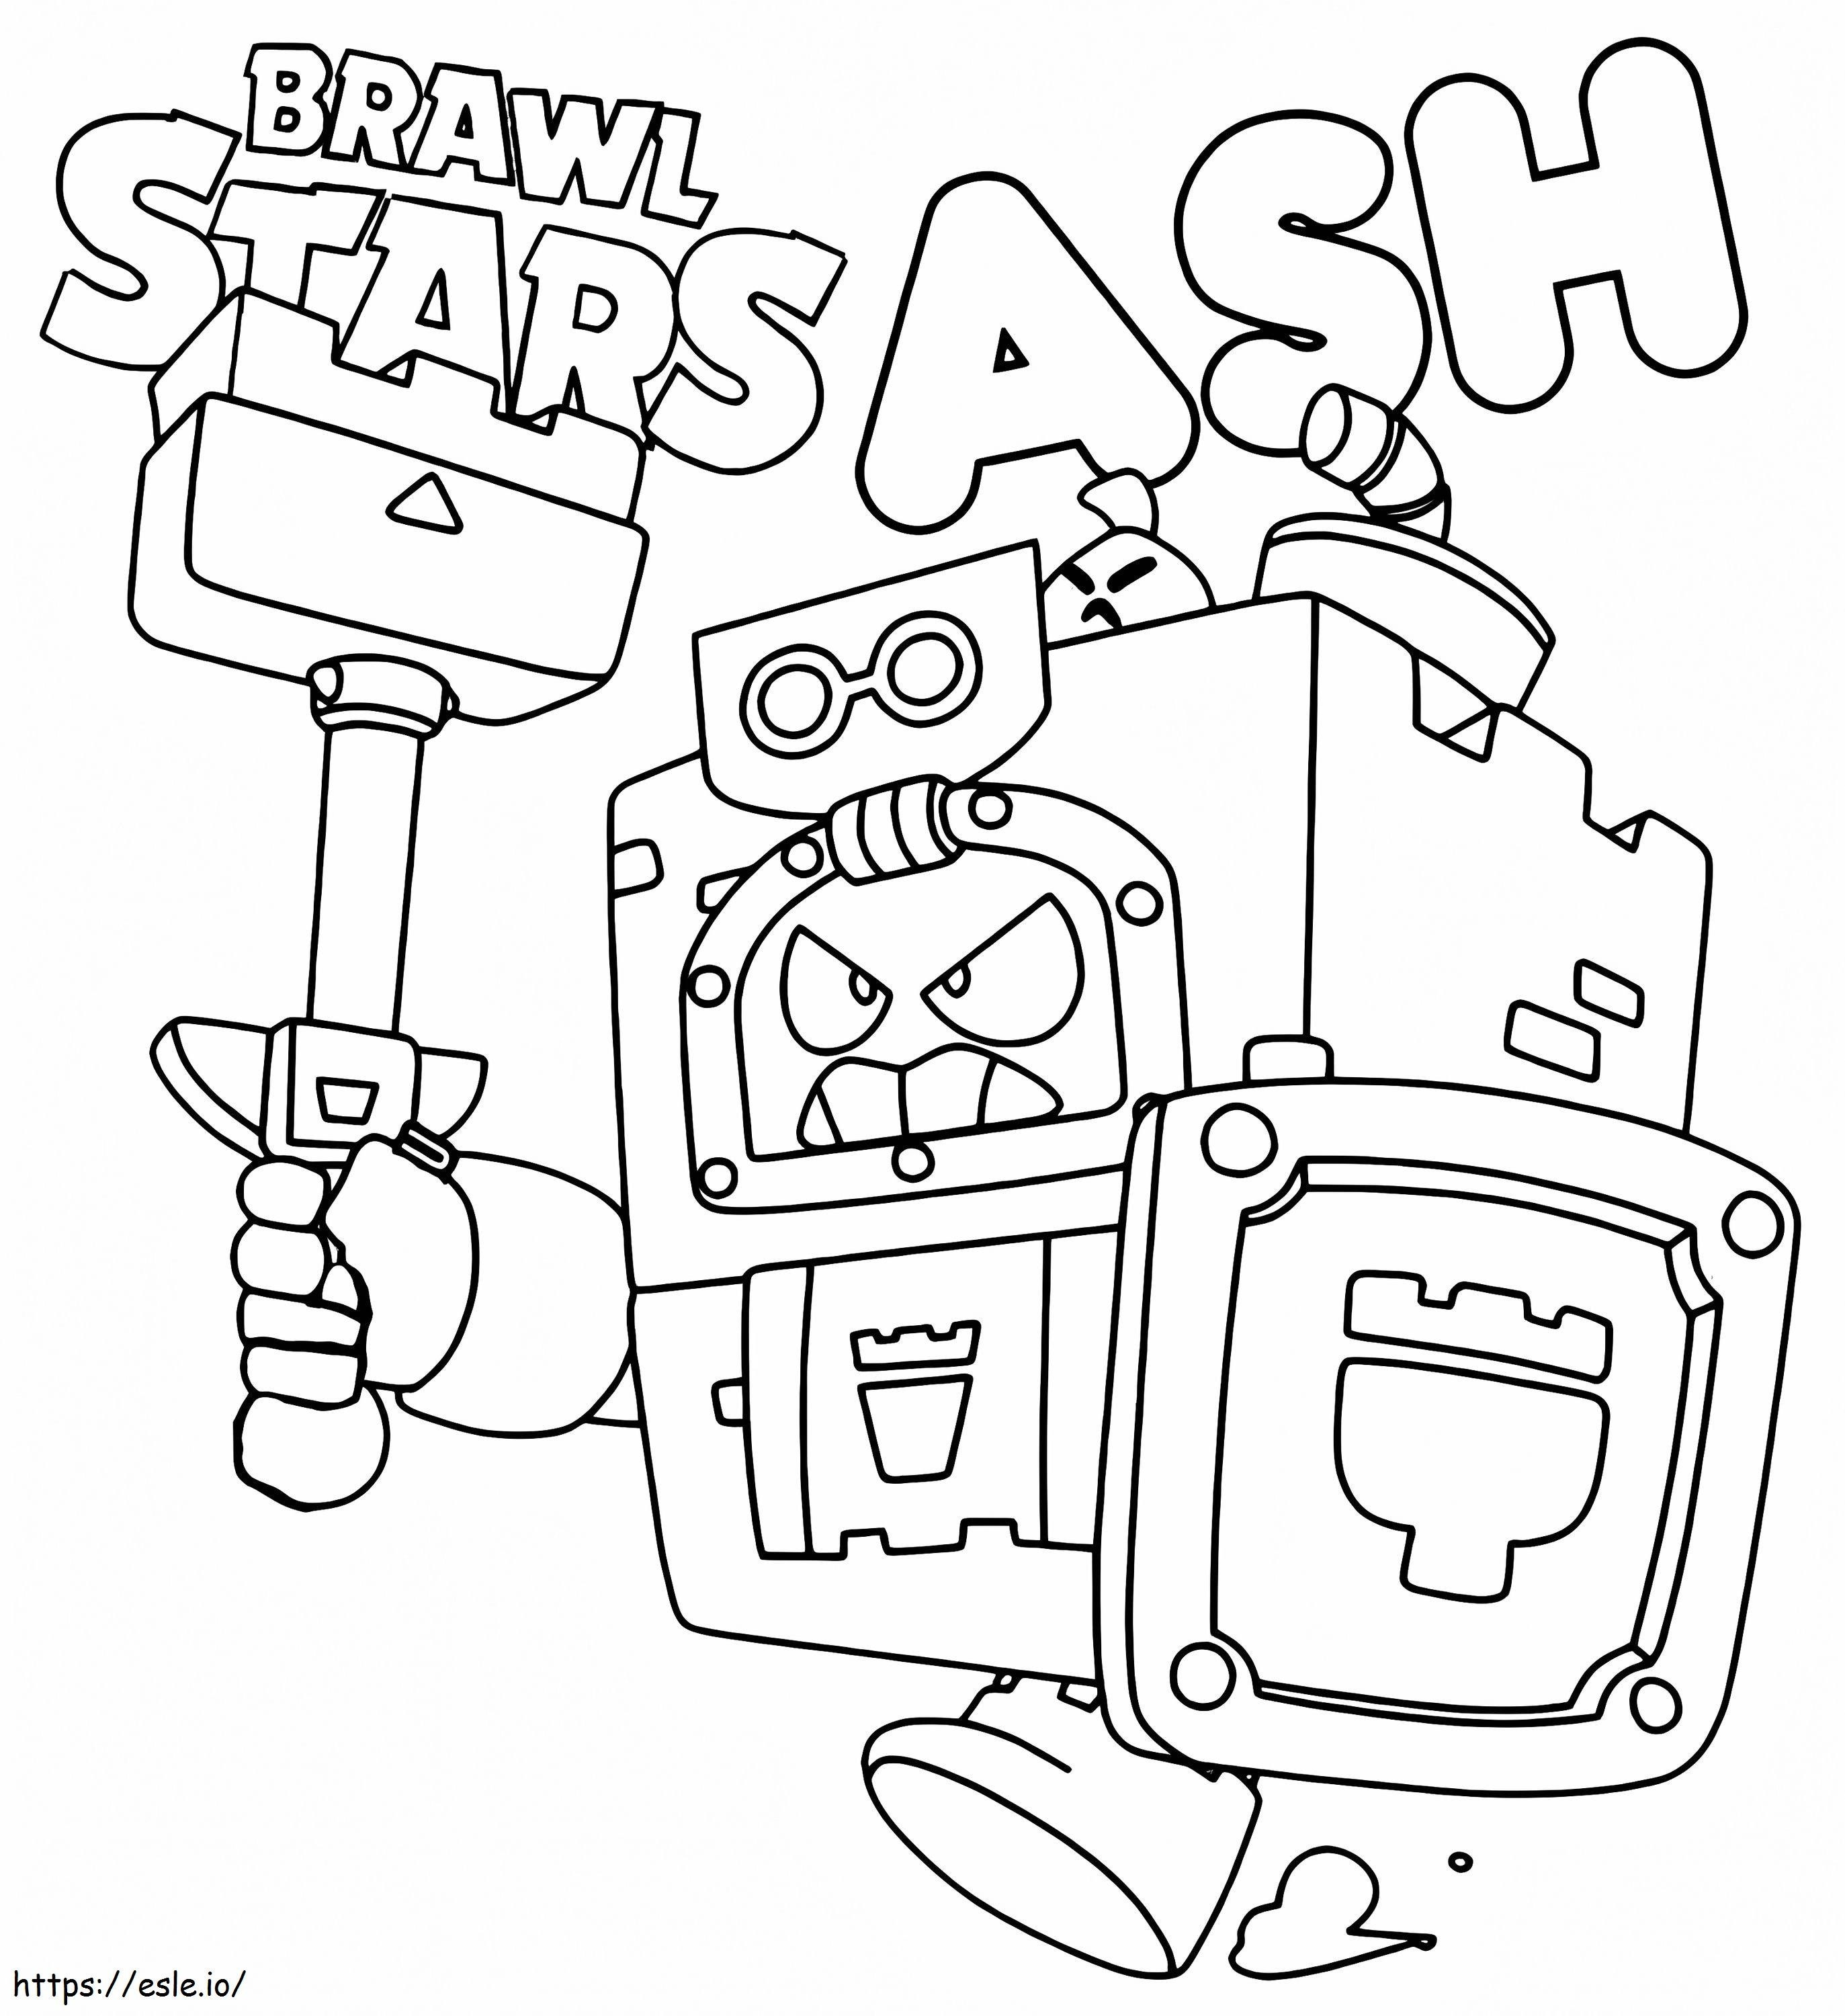 Ash Brawl Stars To Color coloring page